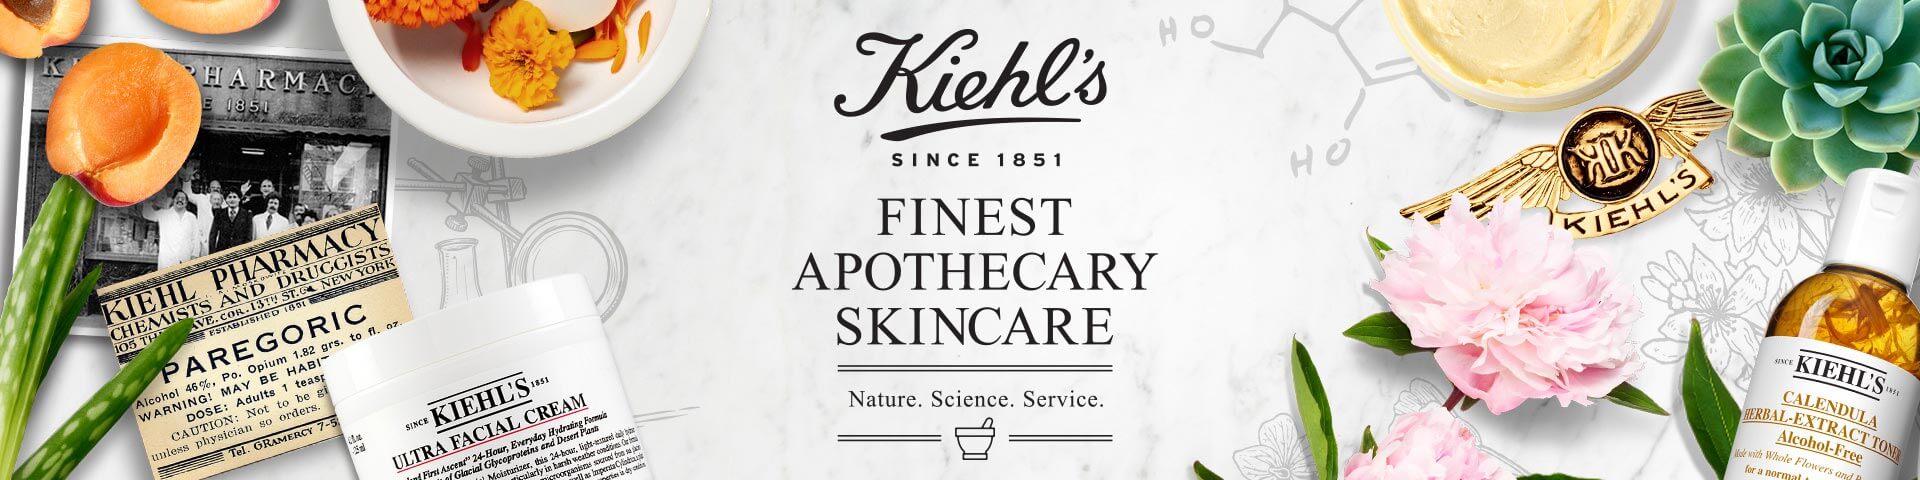 Kiehls Since 1851 - Finest Apothecary Skincare